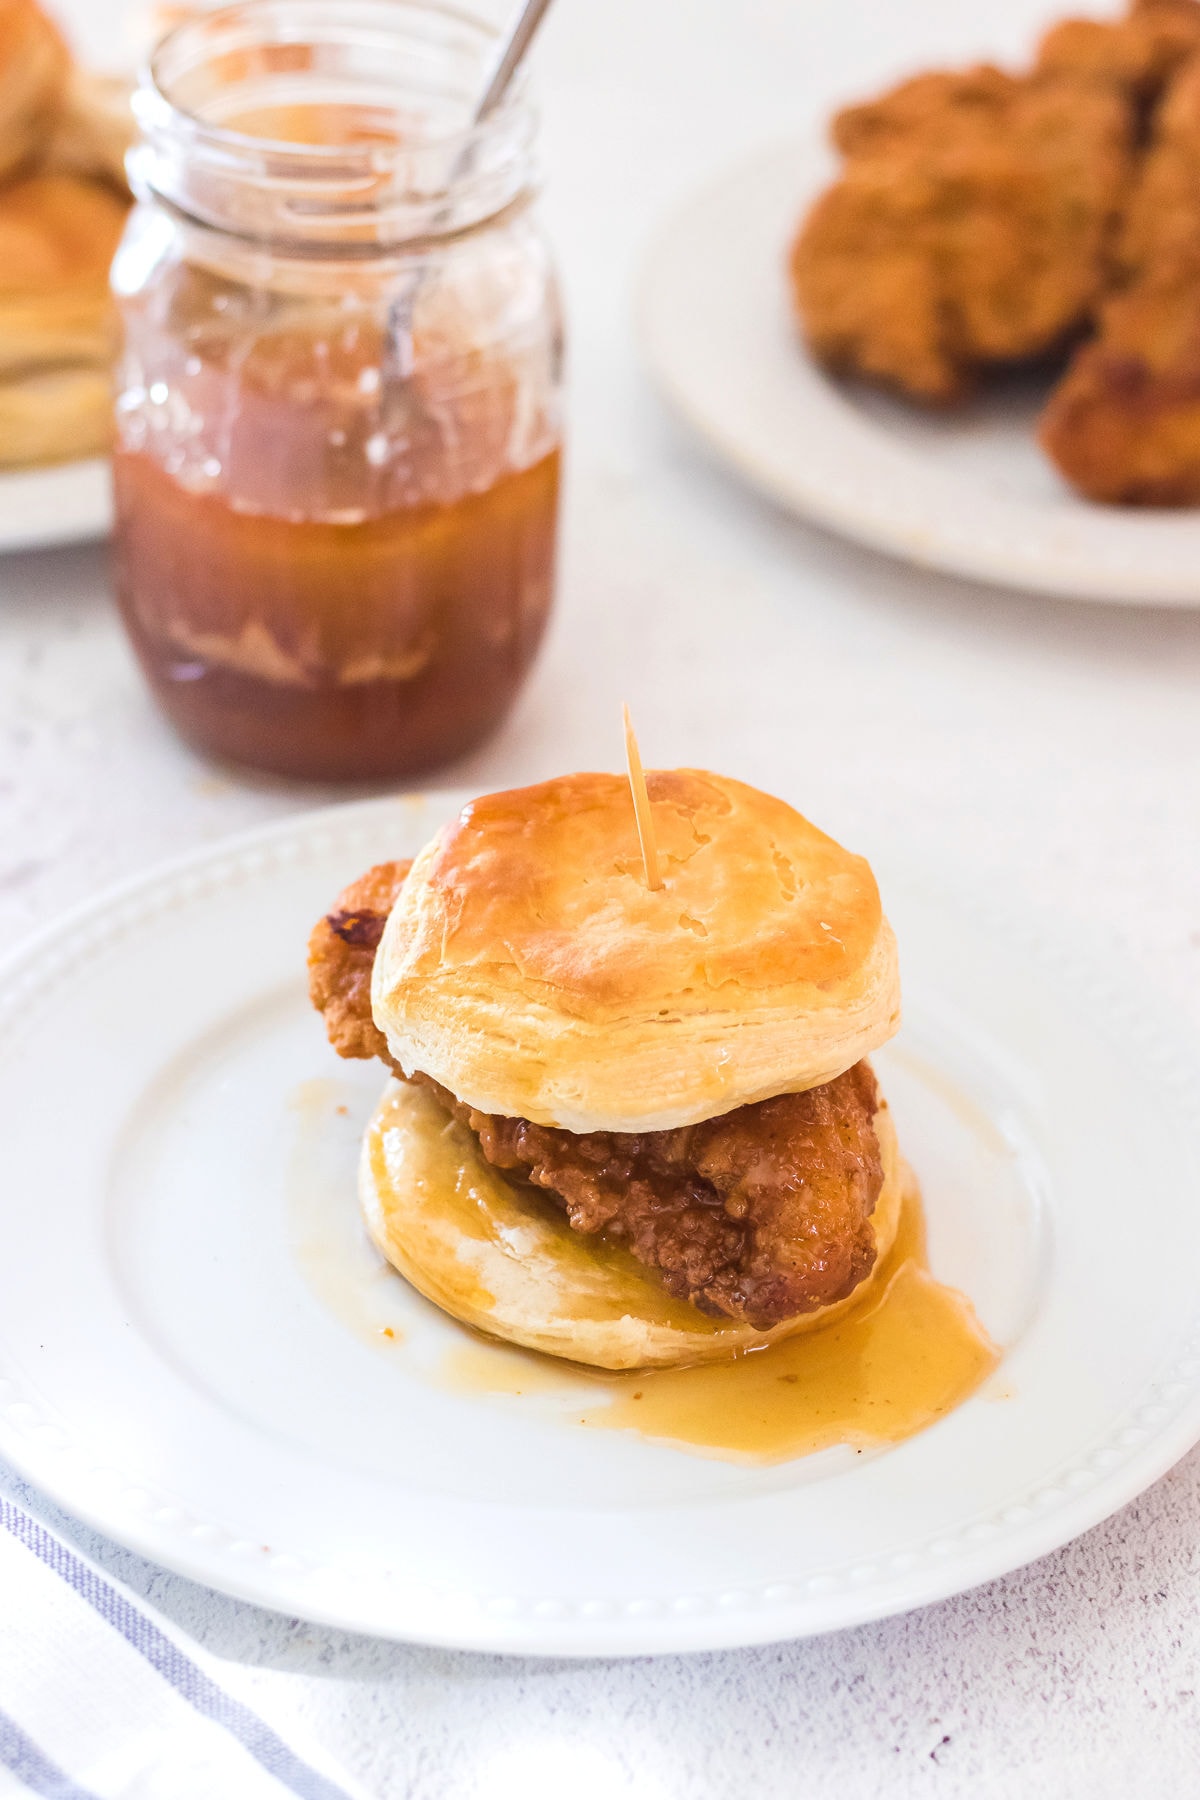 Replying to @biggz A Honey Butter Chicken Biscuit? For Breakfast